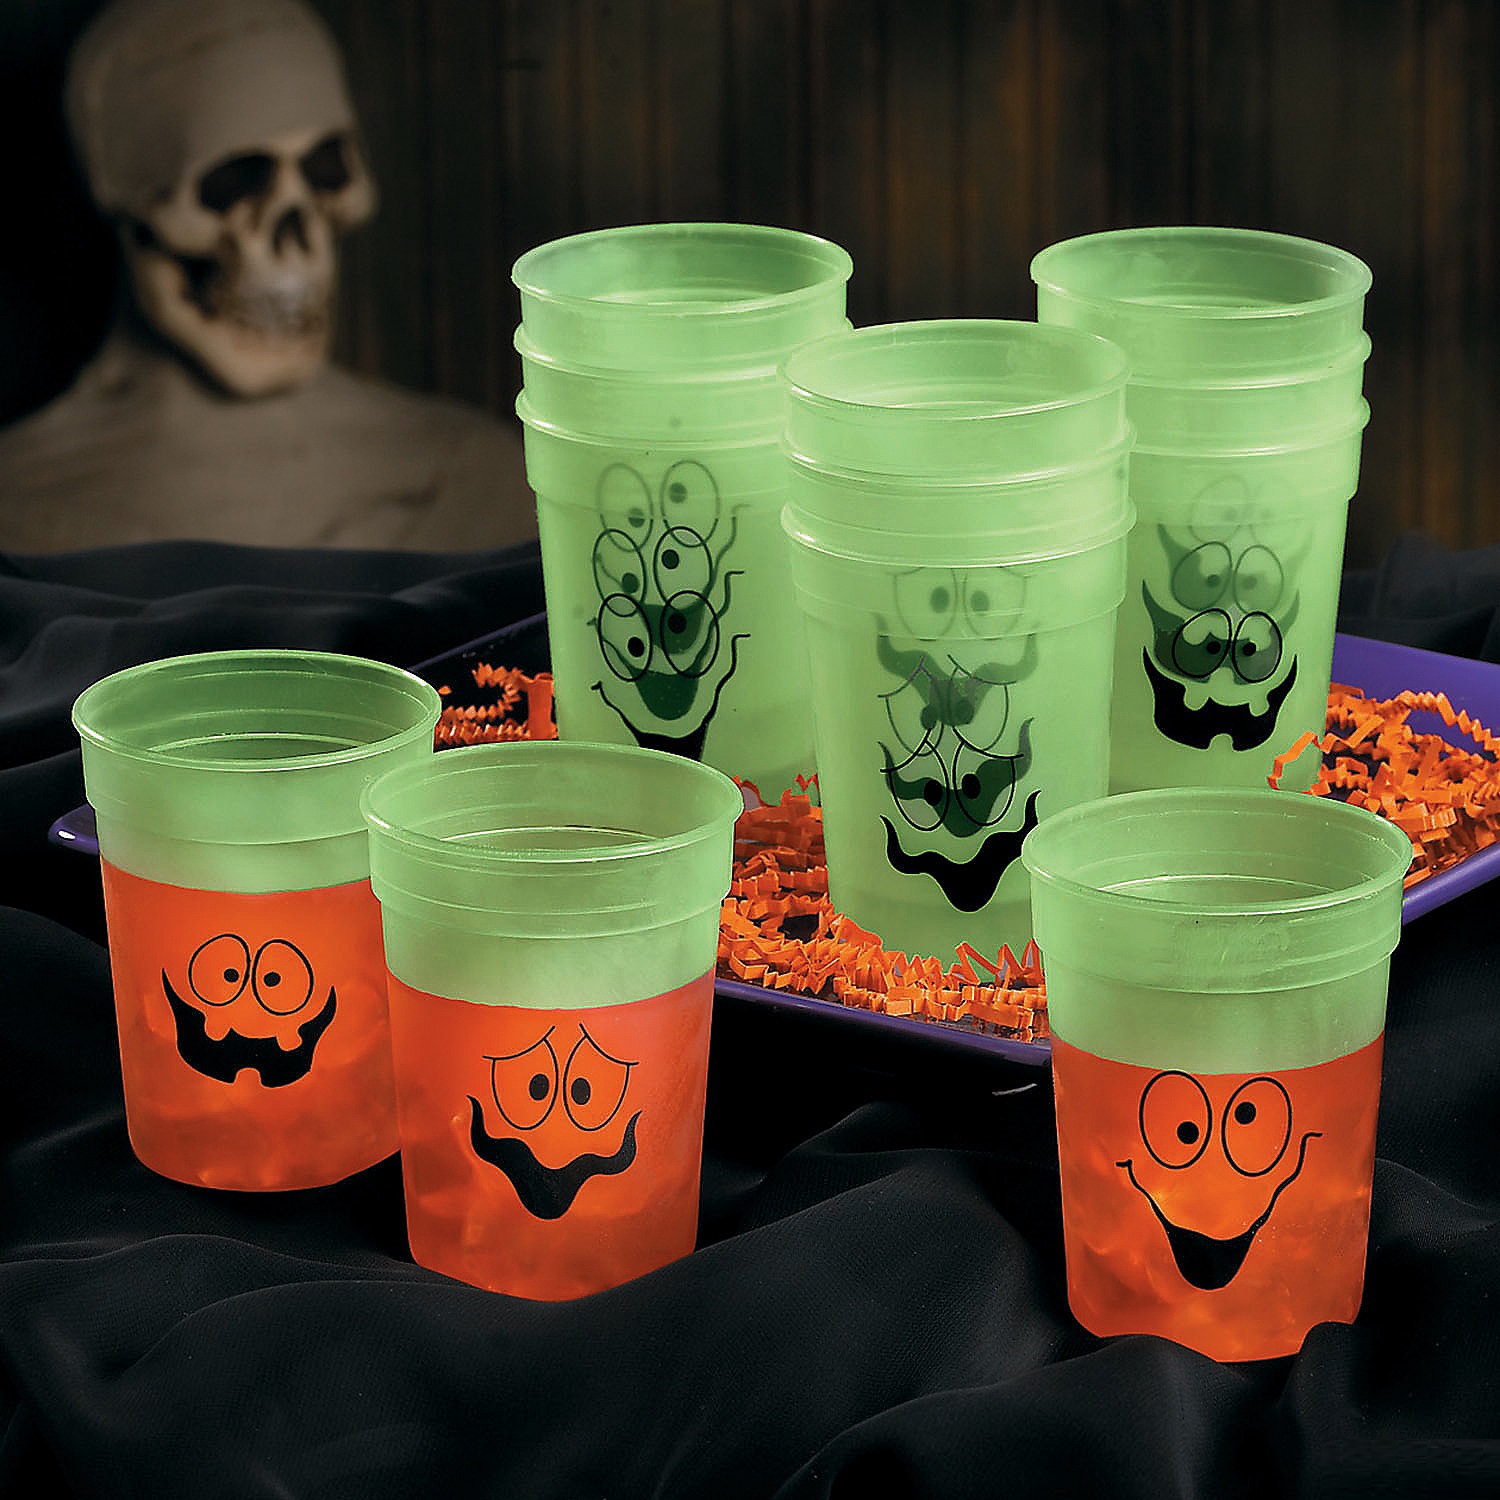 glow-in-the-dark-spooky-face-halloween-plastic-cups-12-pc-_25_3018-a02